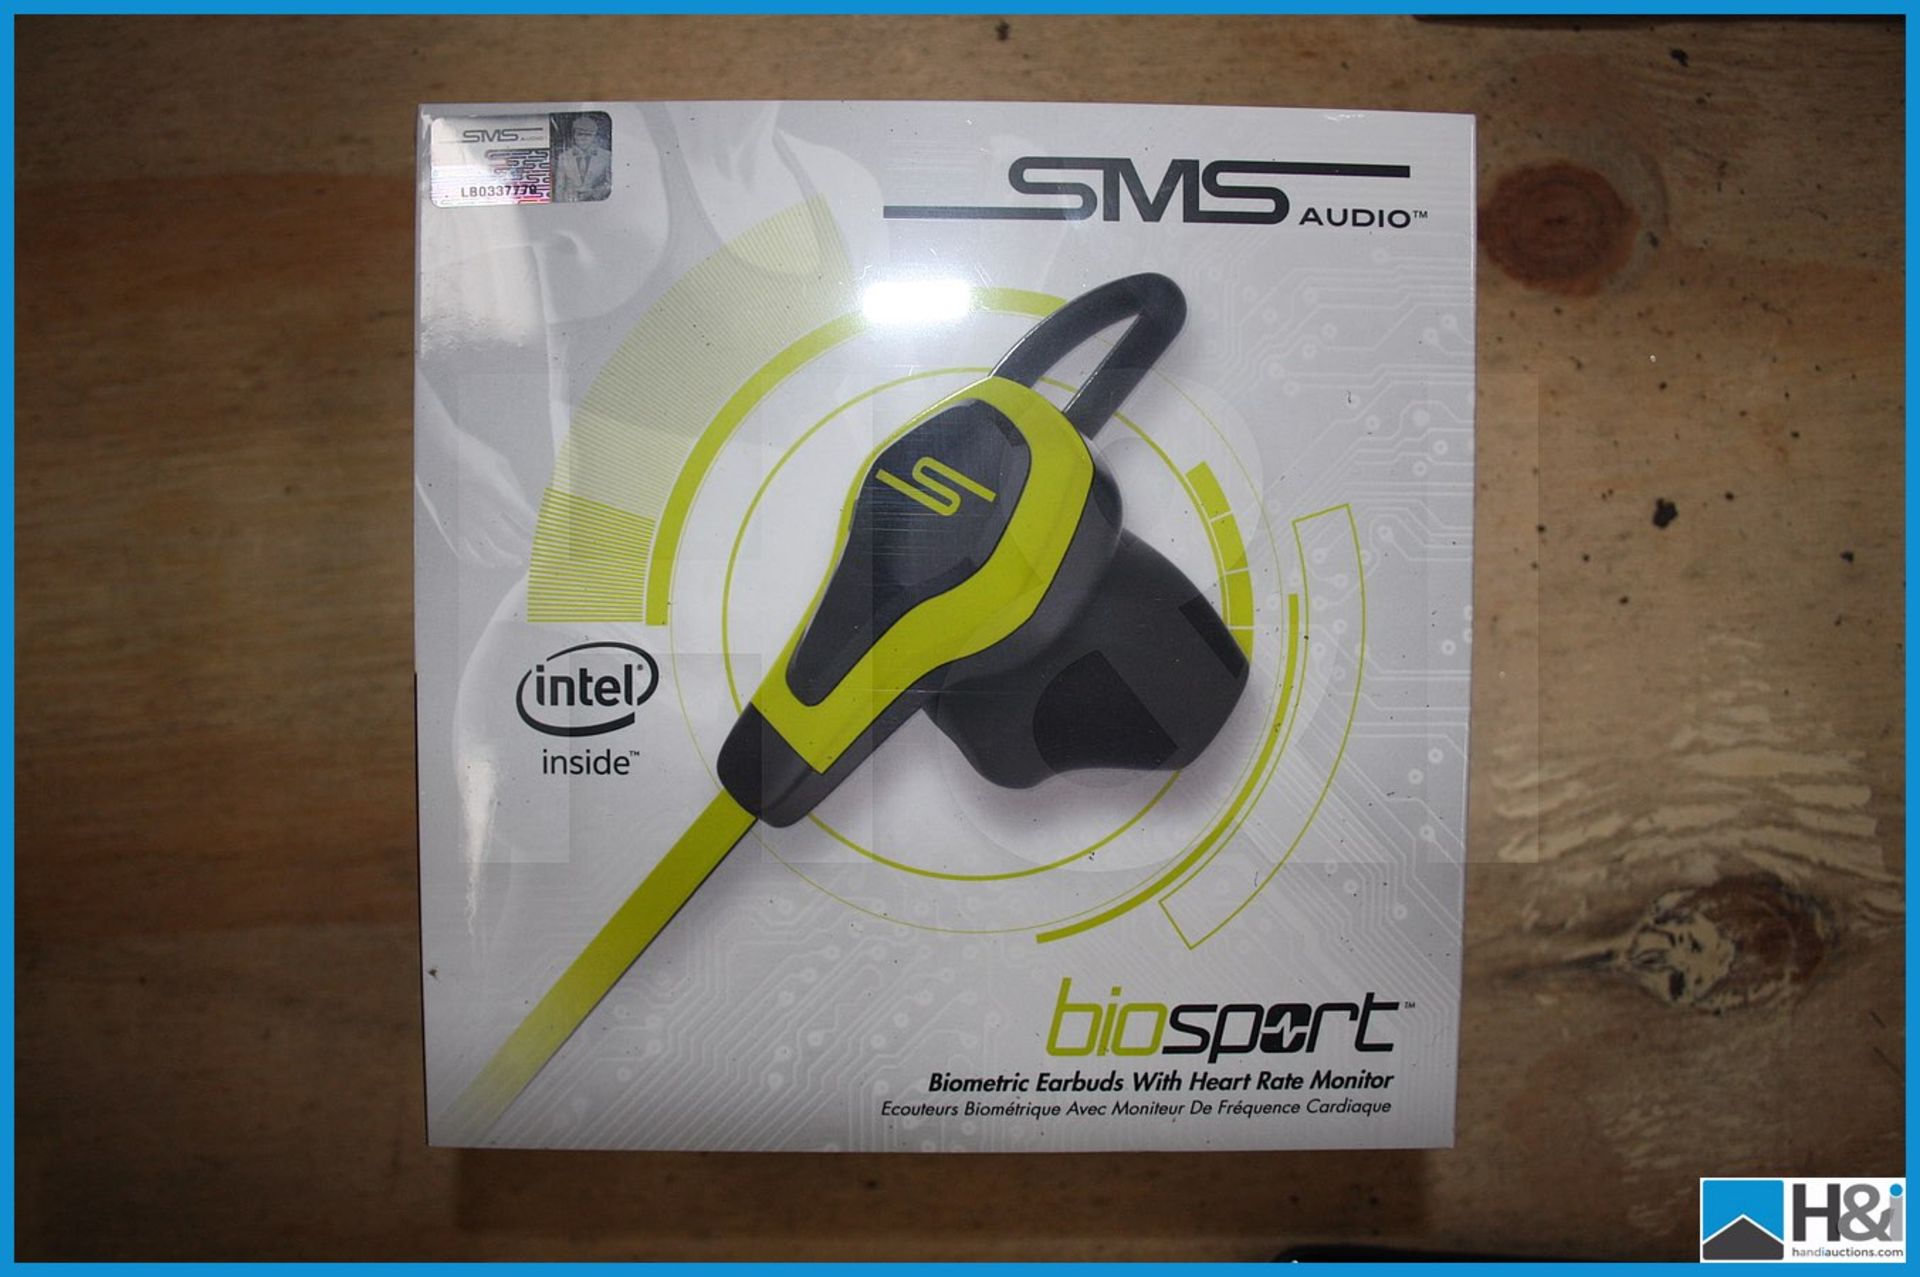 12 off SMS Audio Bio Sport biometric earbuds with heart rate monitor yellow new and boxed Appraisal: - Image 2 of 2